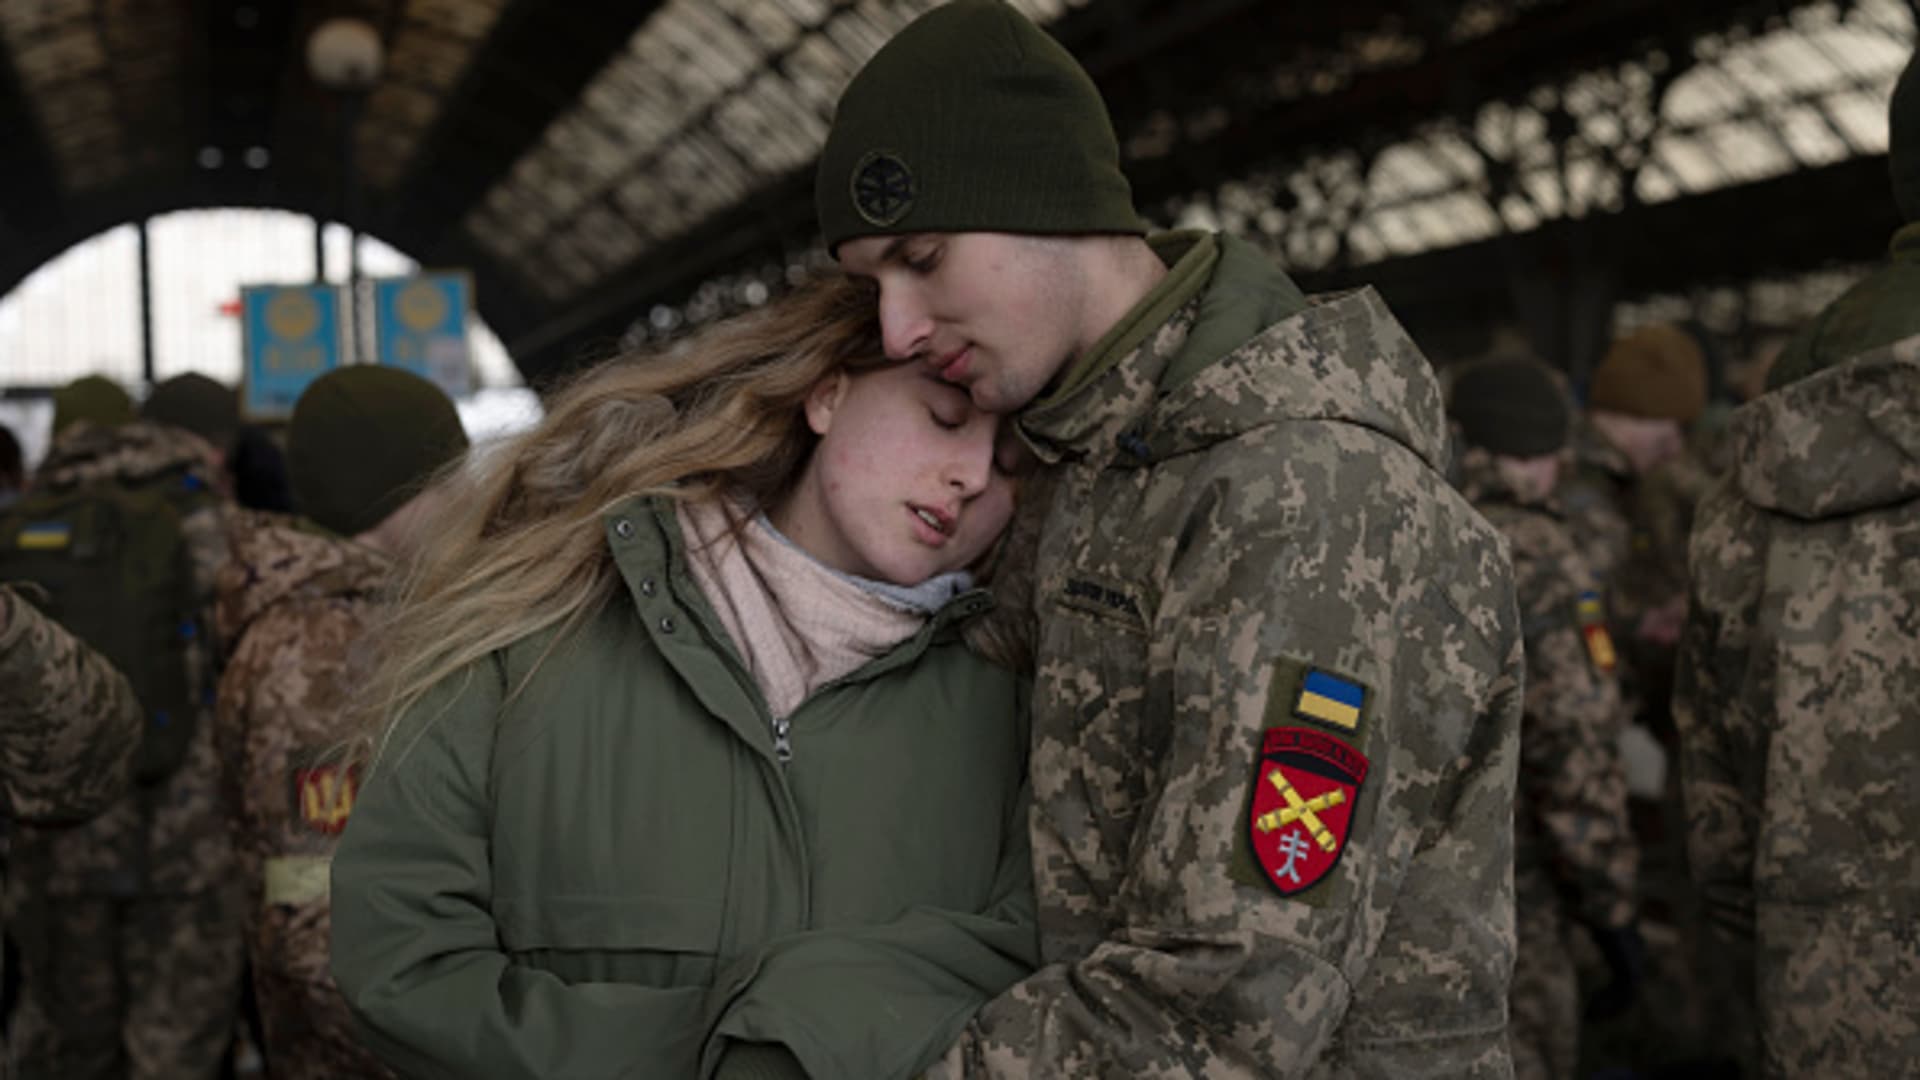 Eugene says goodbye to his partner Tanya before boarding a train to Dnipro from the main train terminal on March 09, 2022 in Lviv, Ukraine.